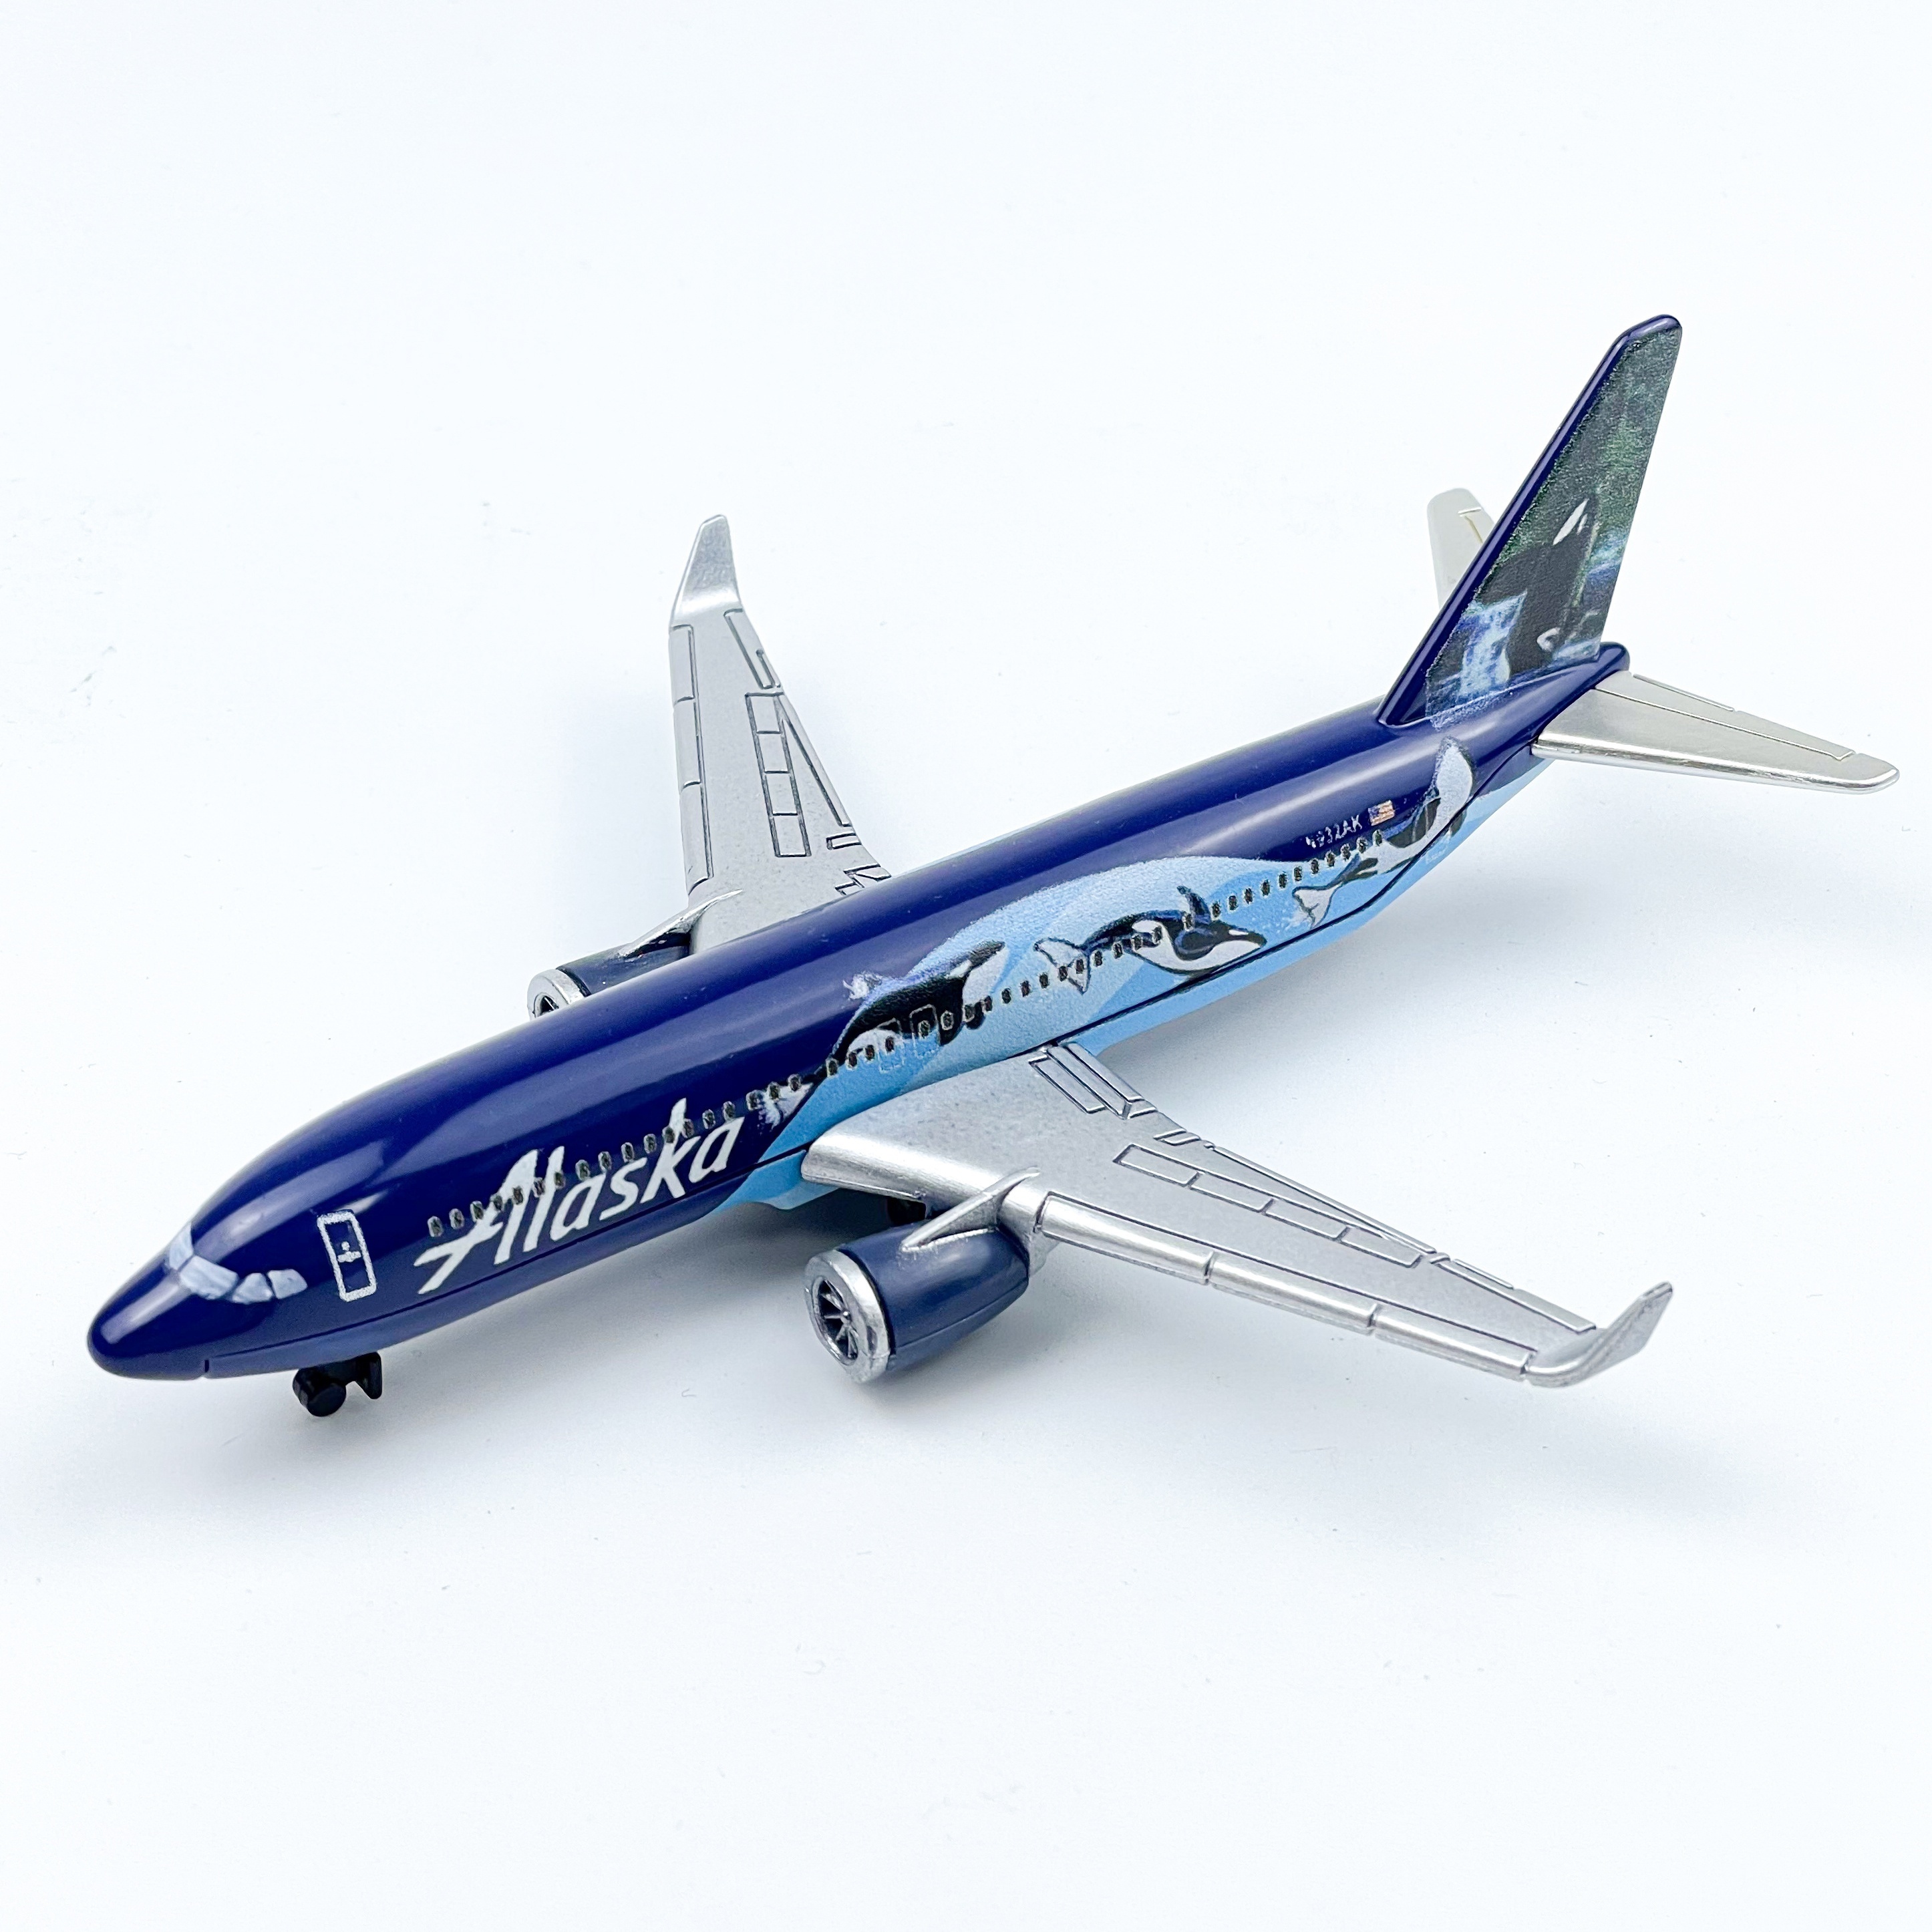 

imaginative" Alaska Whale-themed Airplane Model - Perfect For Collectors, Christmas & Birthday Gifts, Home Decor | Durable Metal Construction | Ages 3-12